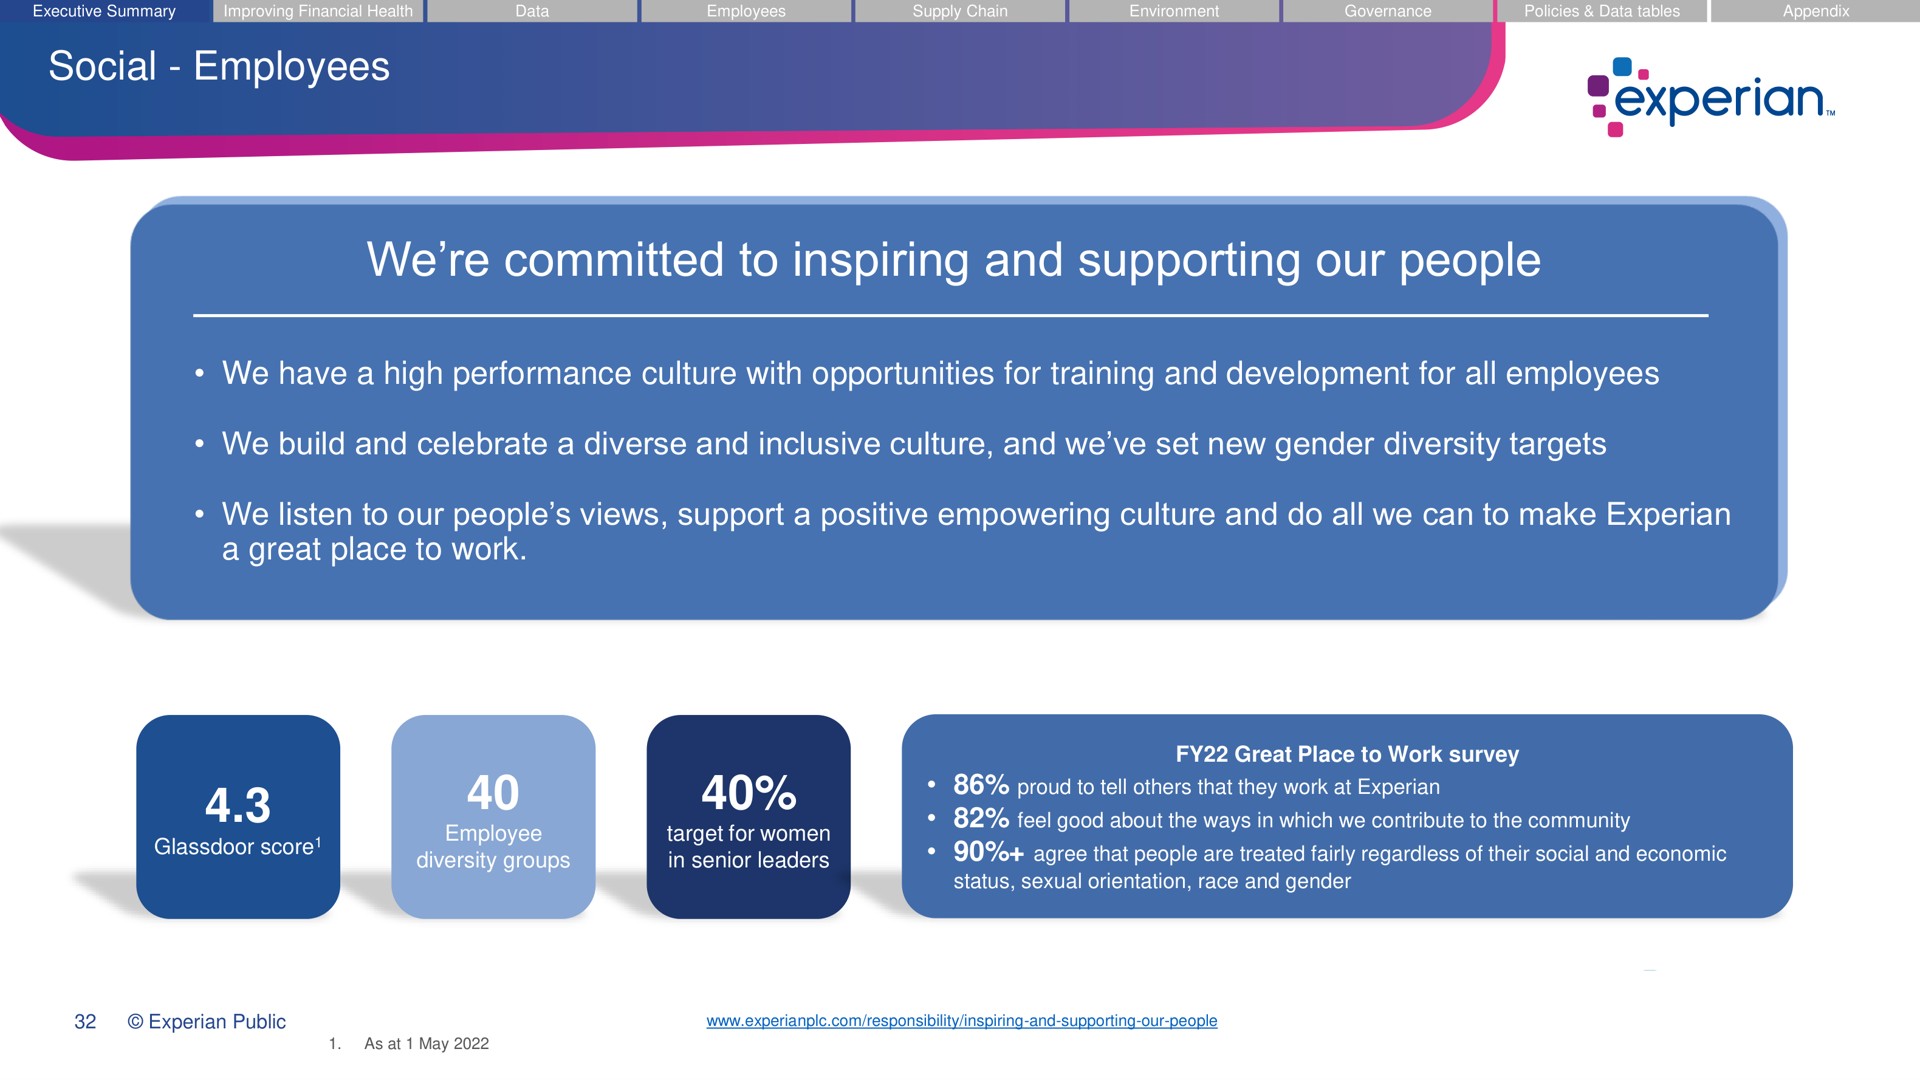 social employees we committed to inspiring and supporting our people we have a high performance culture with opportunities for training and development for all employees we build and celebrate a diverse and inclusive culture and we set new gender diversity targets we listen to our people views support a positive empowering culture and do all we can to make a great place to work | Experian